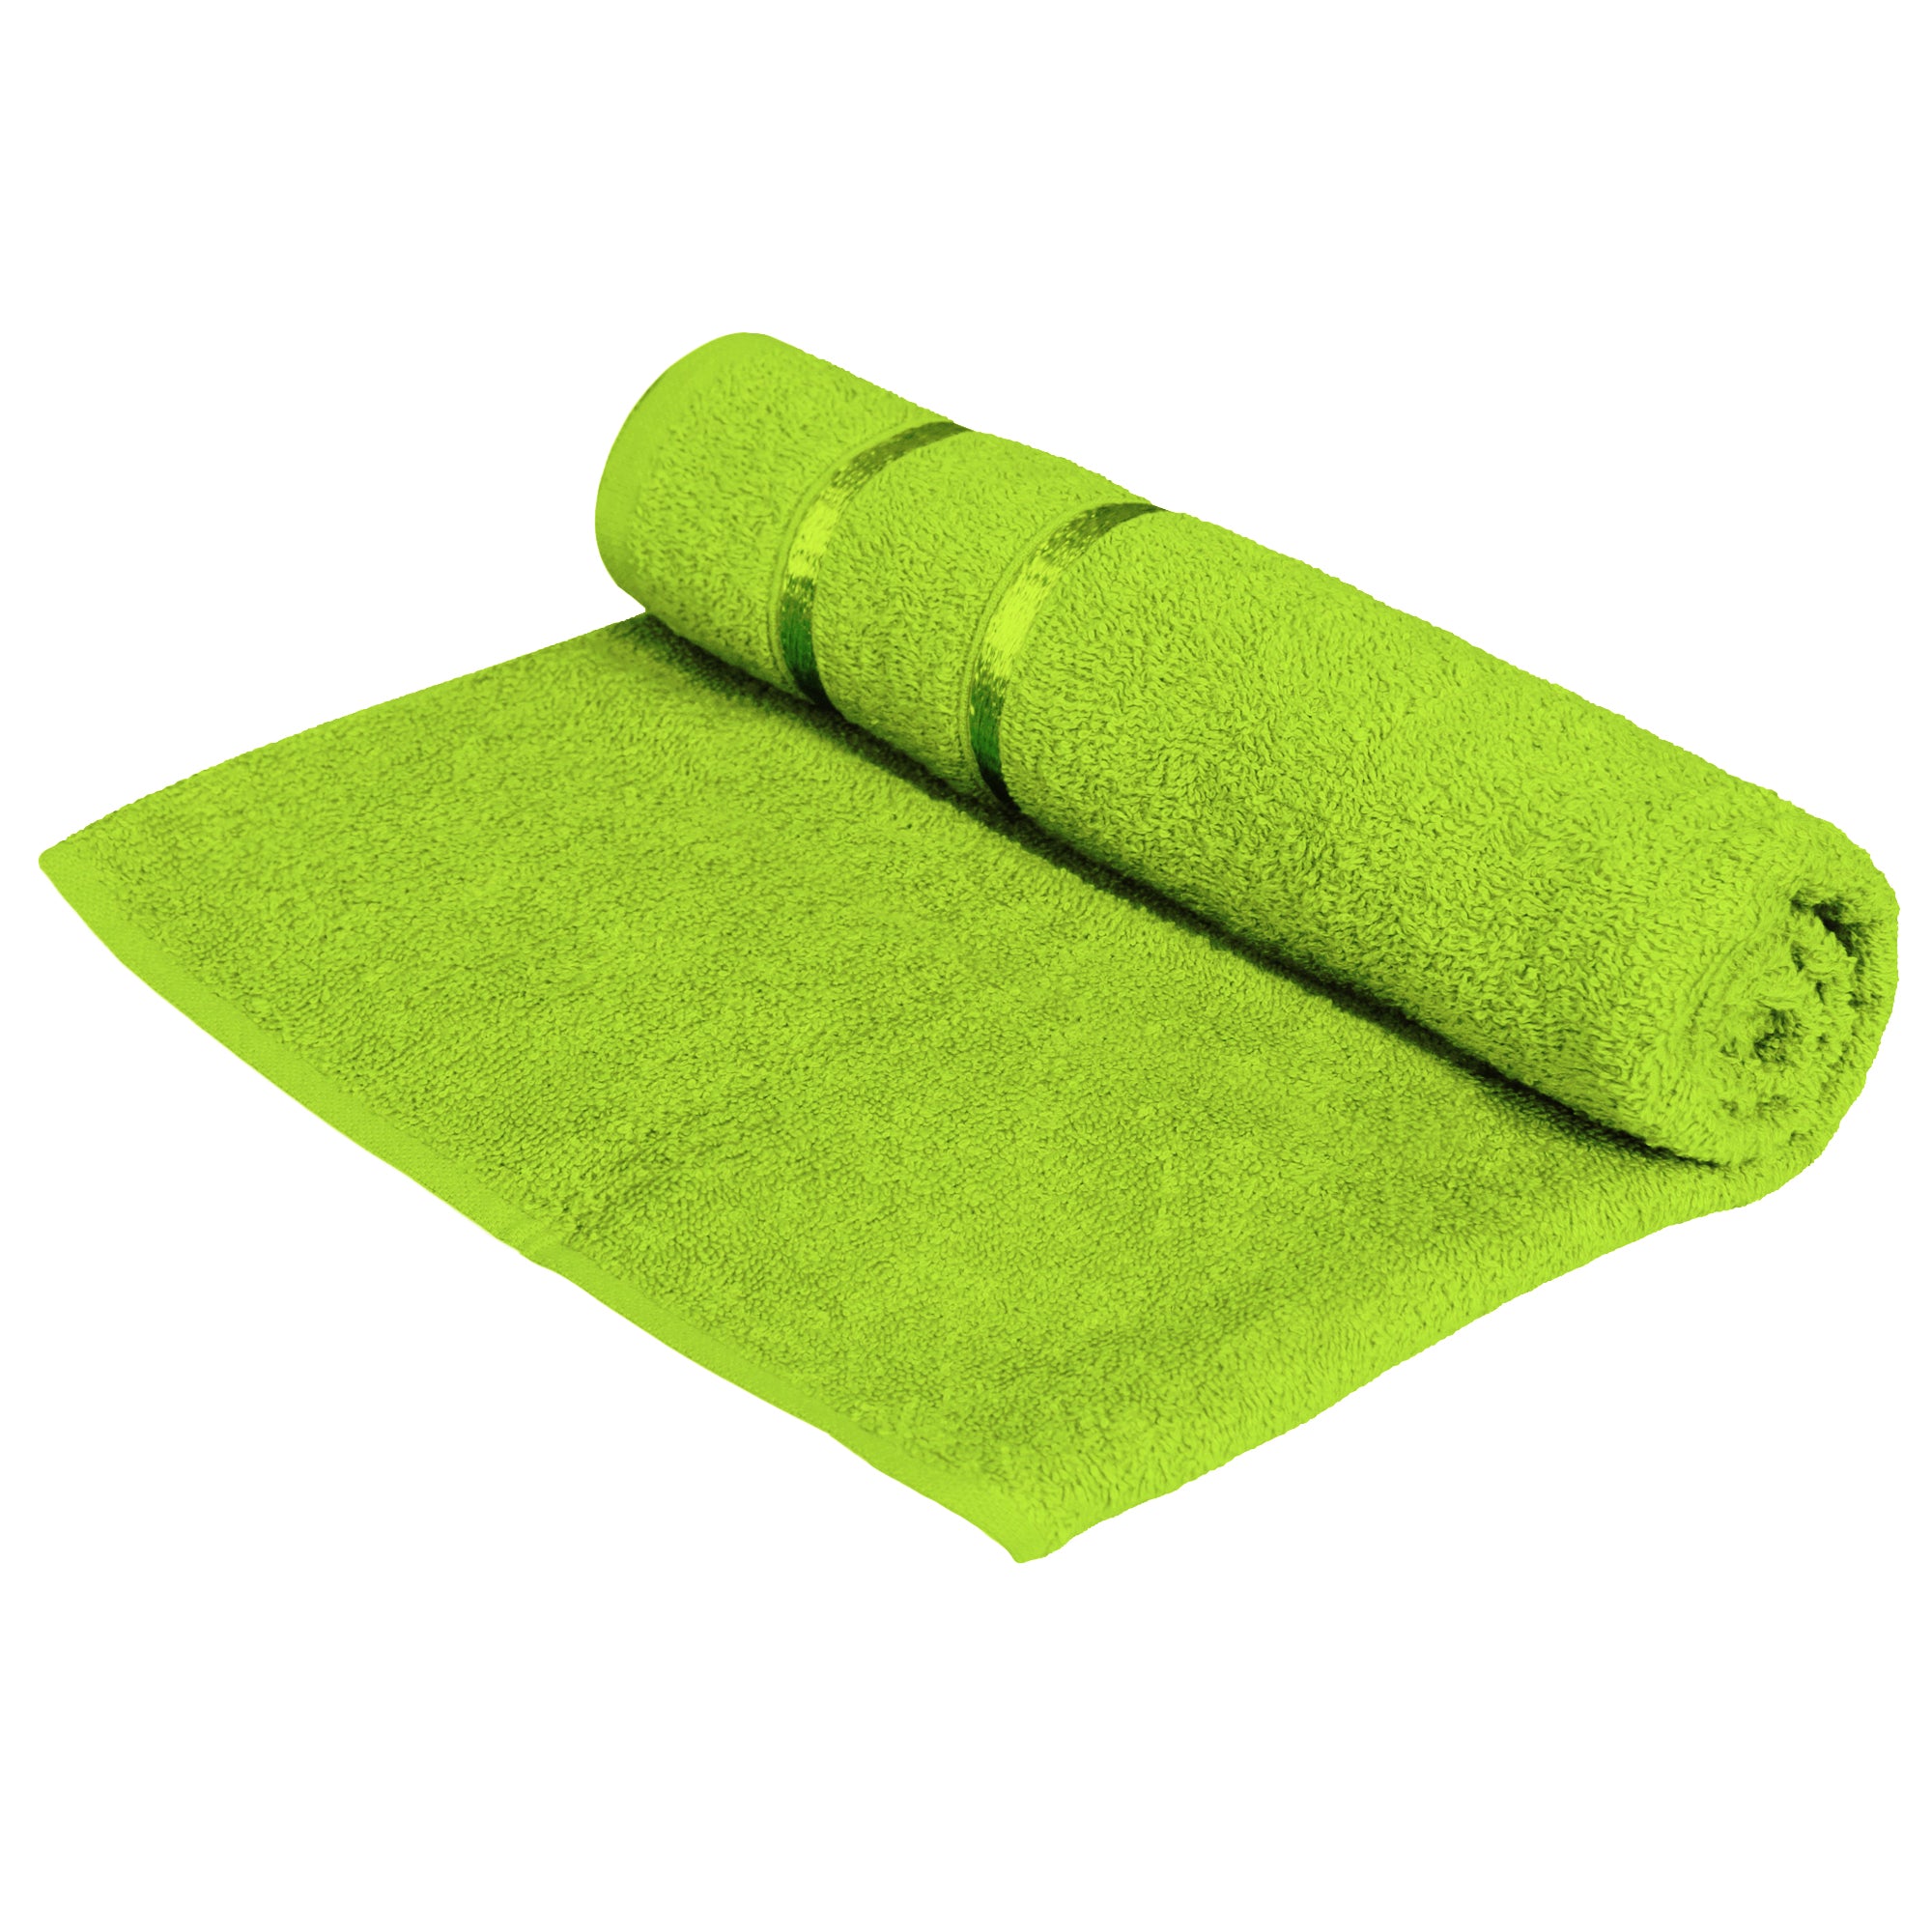 Story@Home 2 Units 100% Cotton Ladies Bath Towels - Green and Wine Red